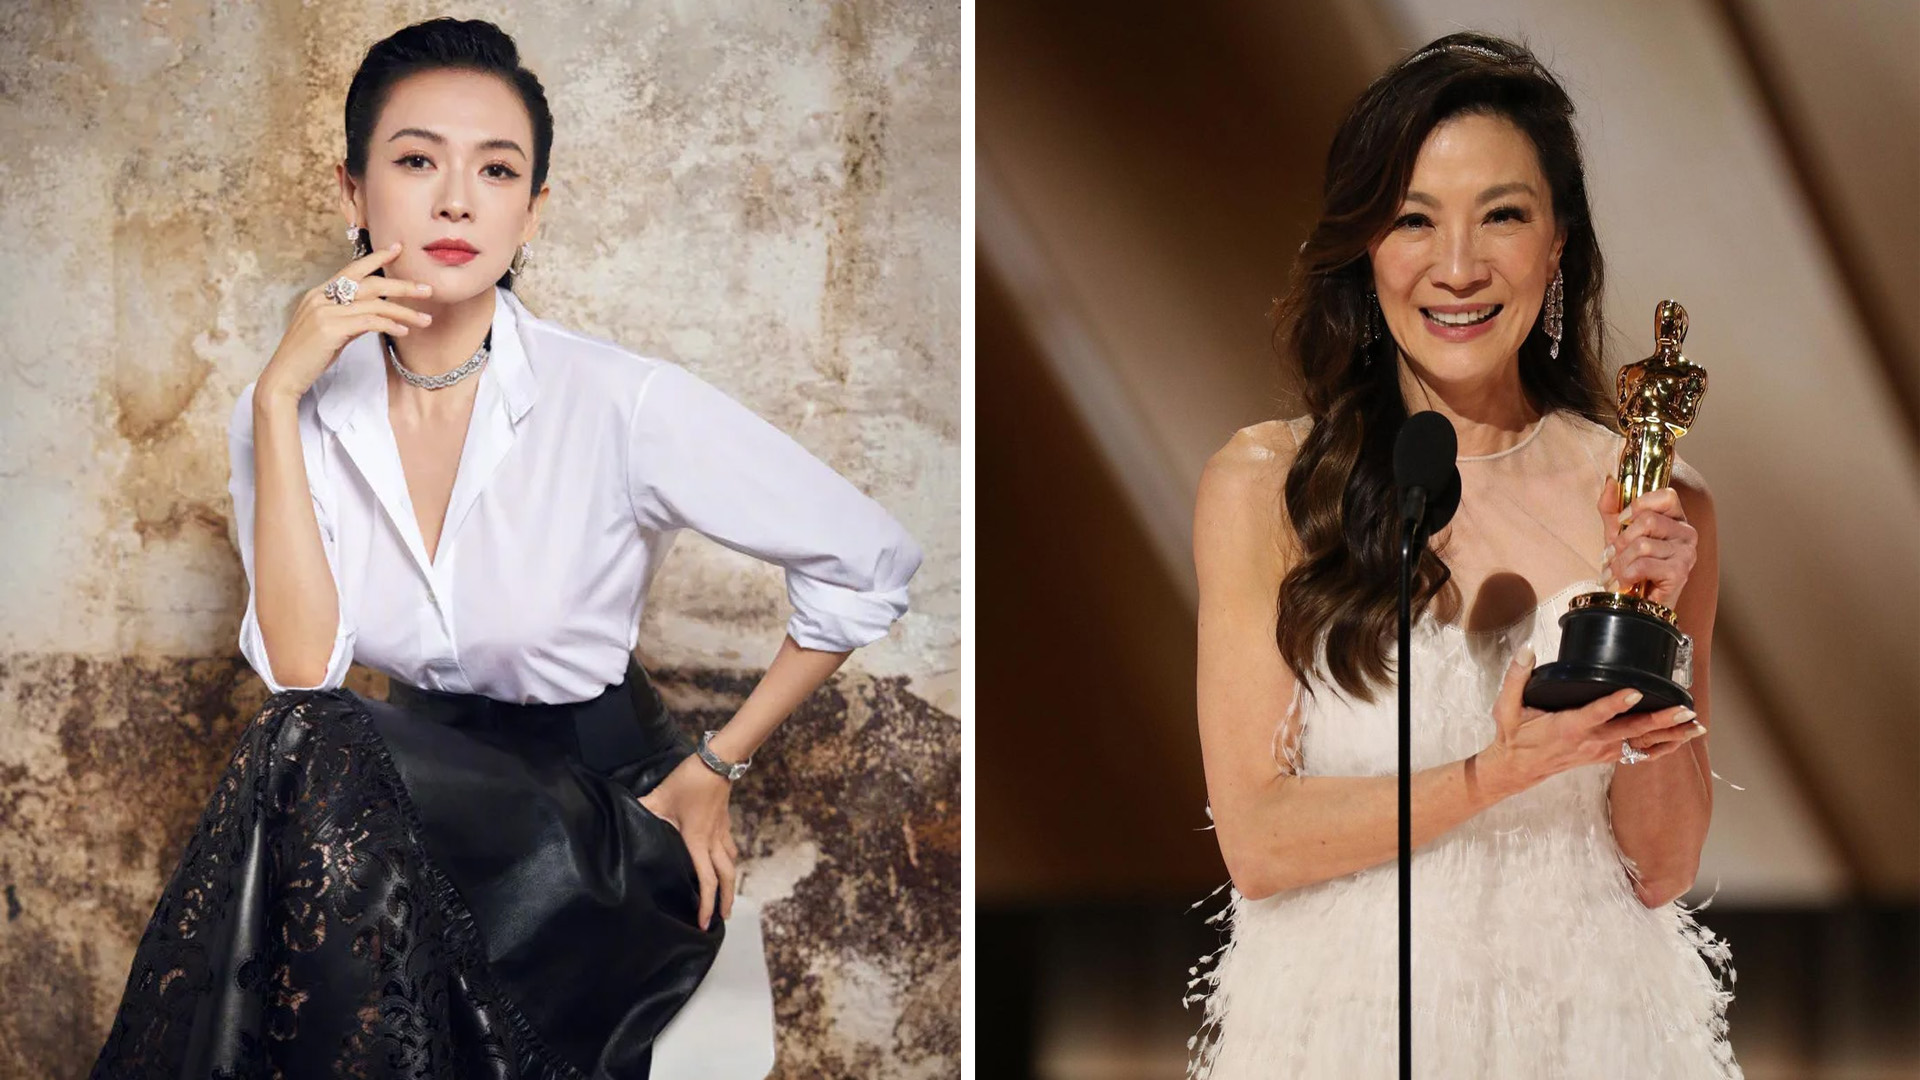 Zhang Ziyi Said To Have Reported Netizen For Mocking Her After She Did